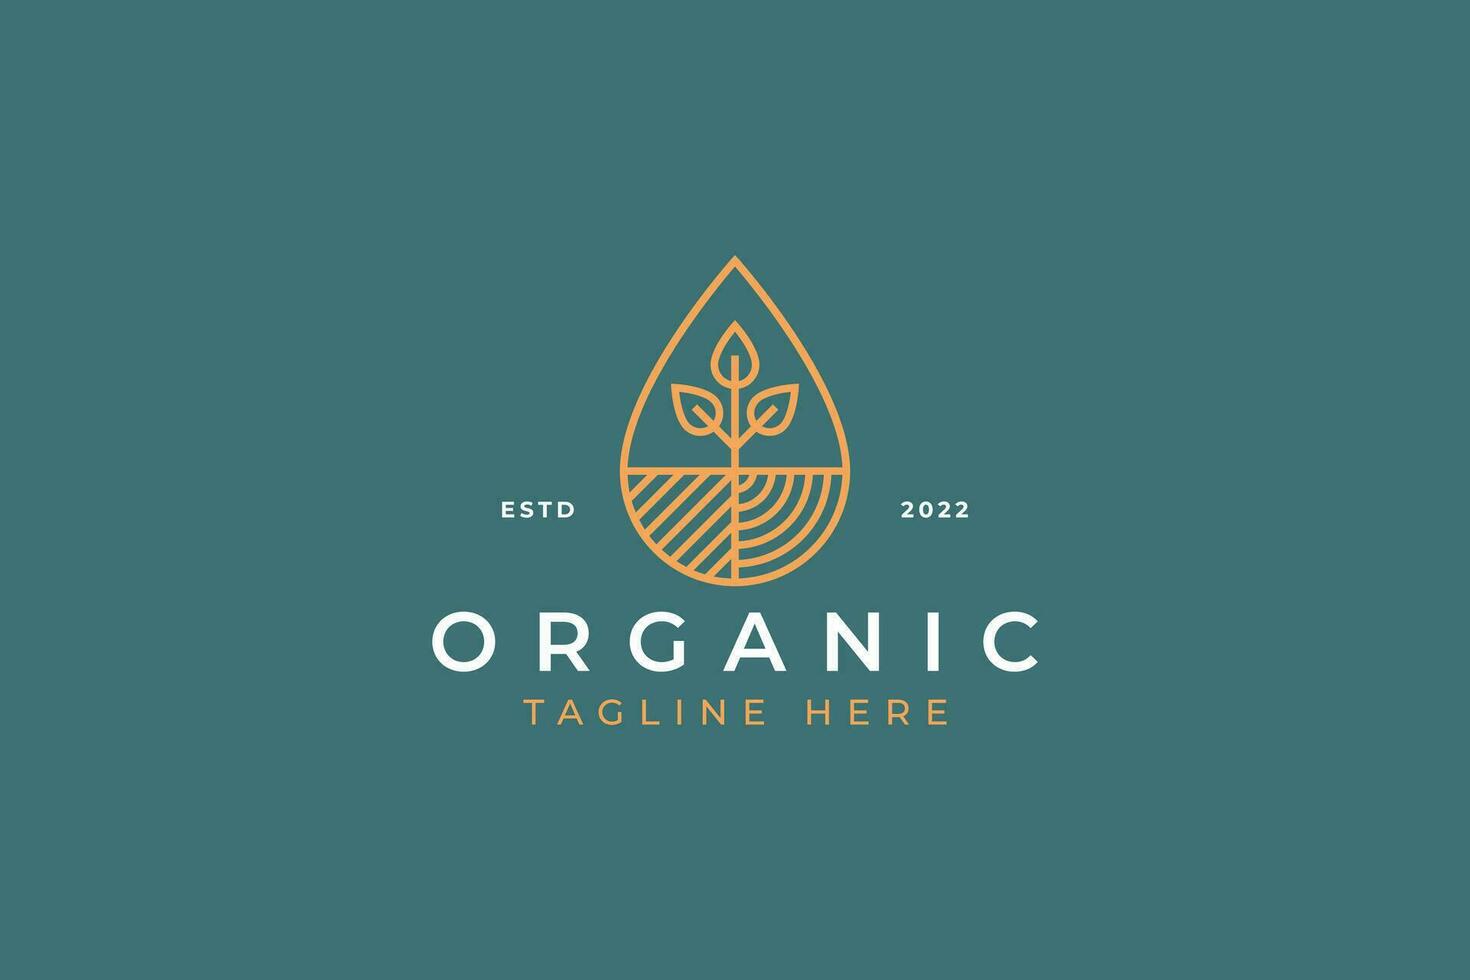 Organic Logo with Abstract Geometric Illustration Plant, Water Drop, Field for Food, Healthy Life and Agriculture Industry Brand Identity Concept. vector